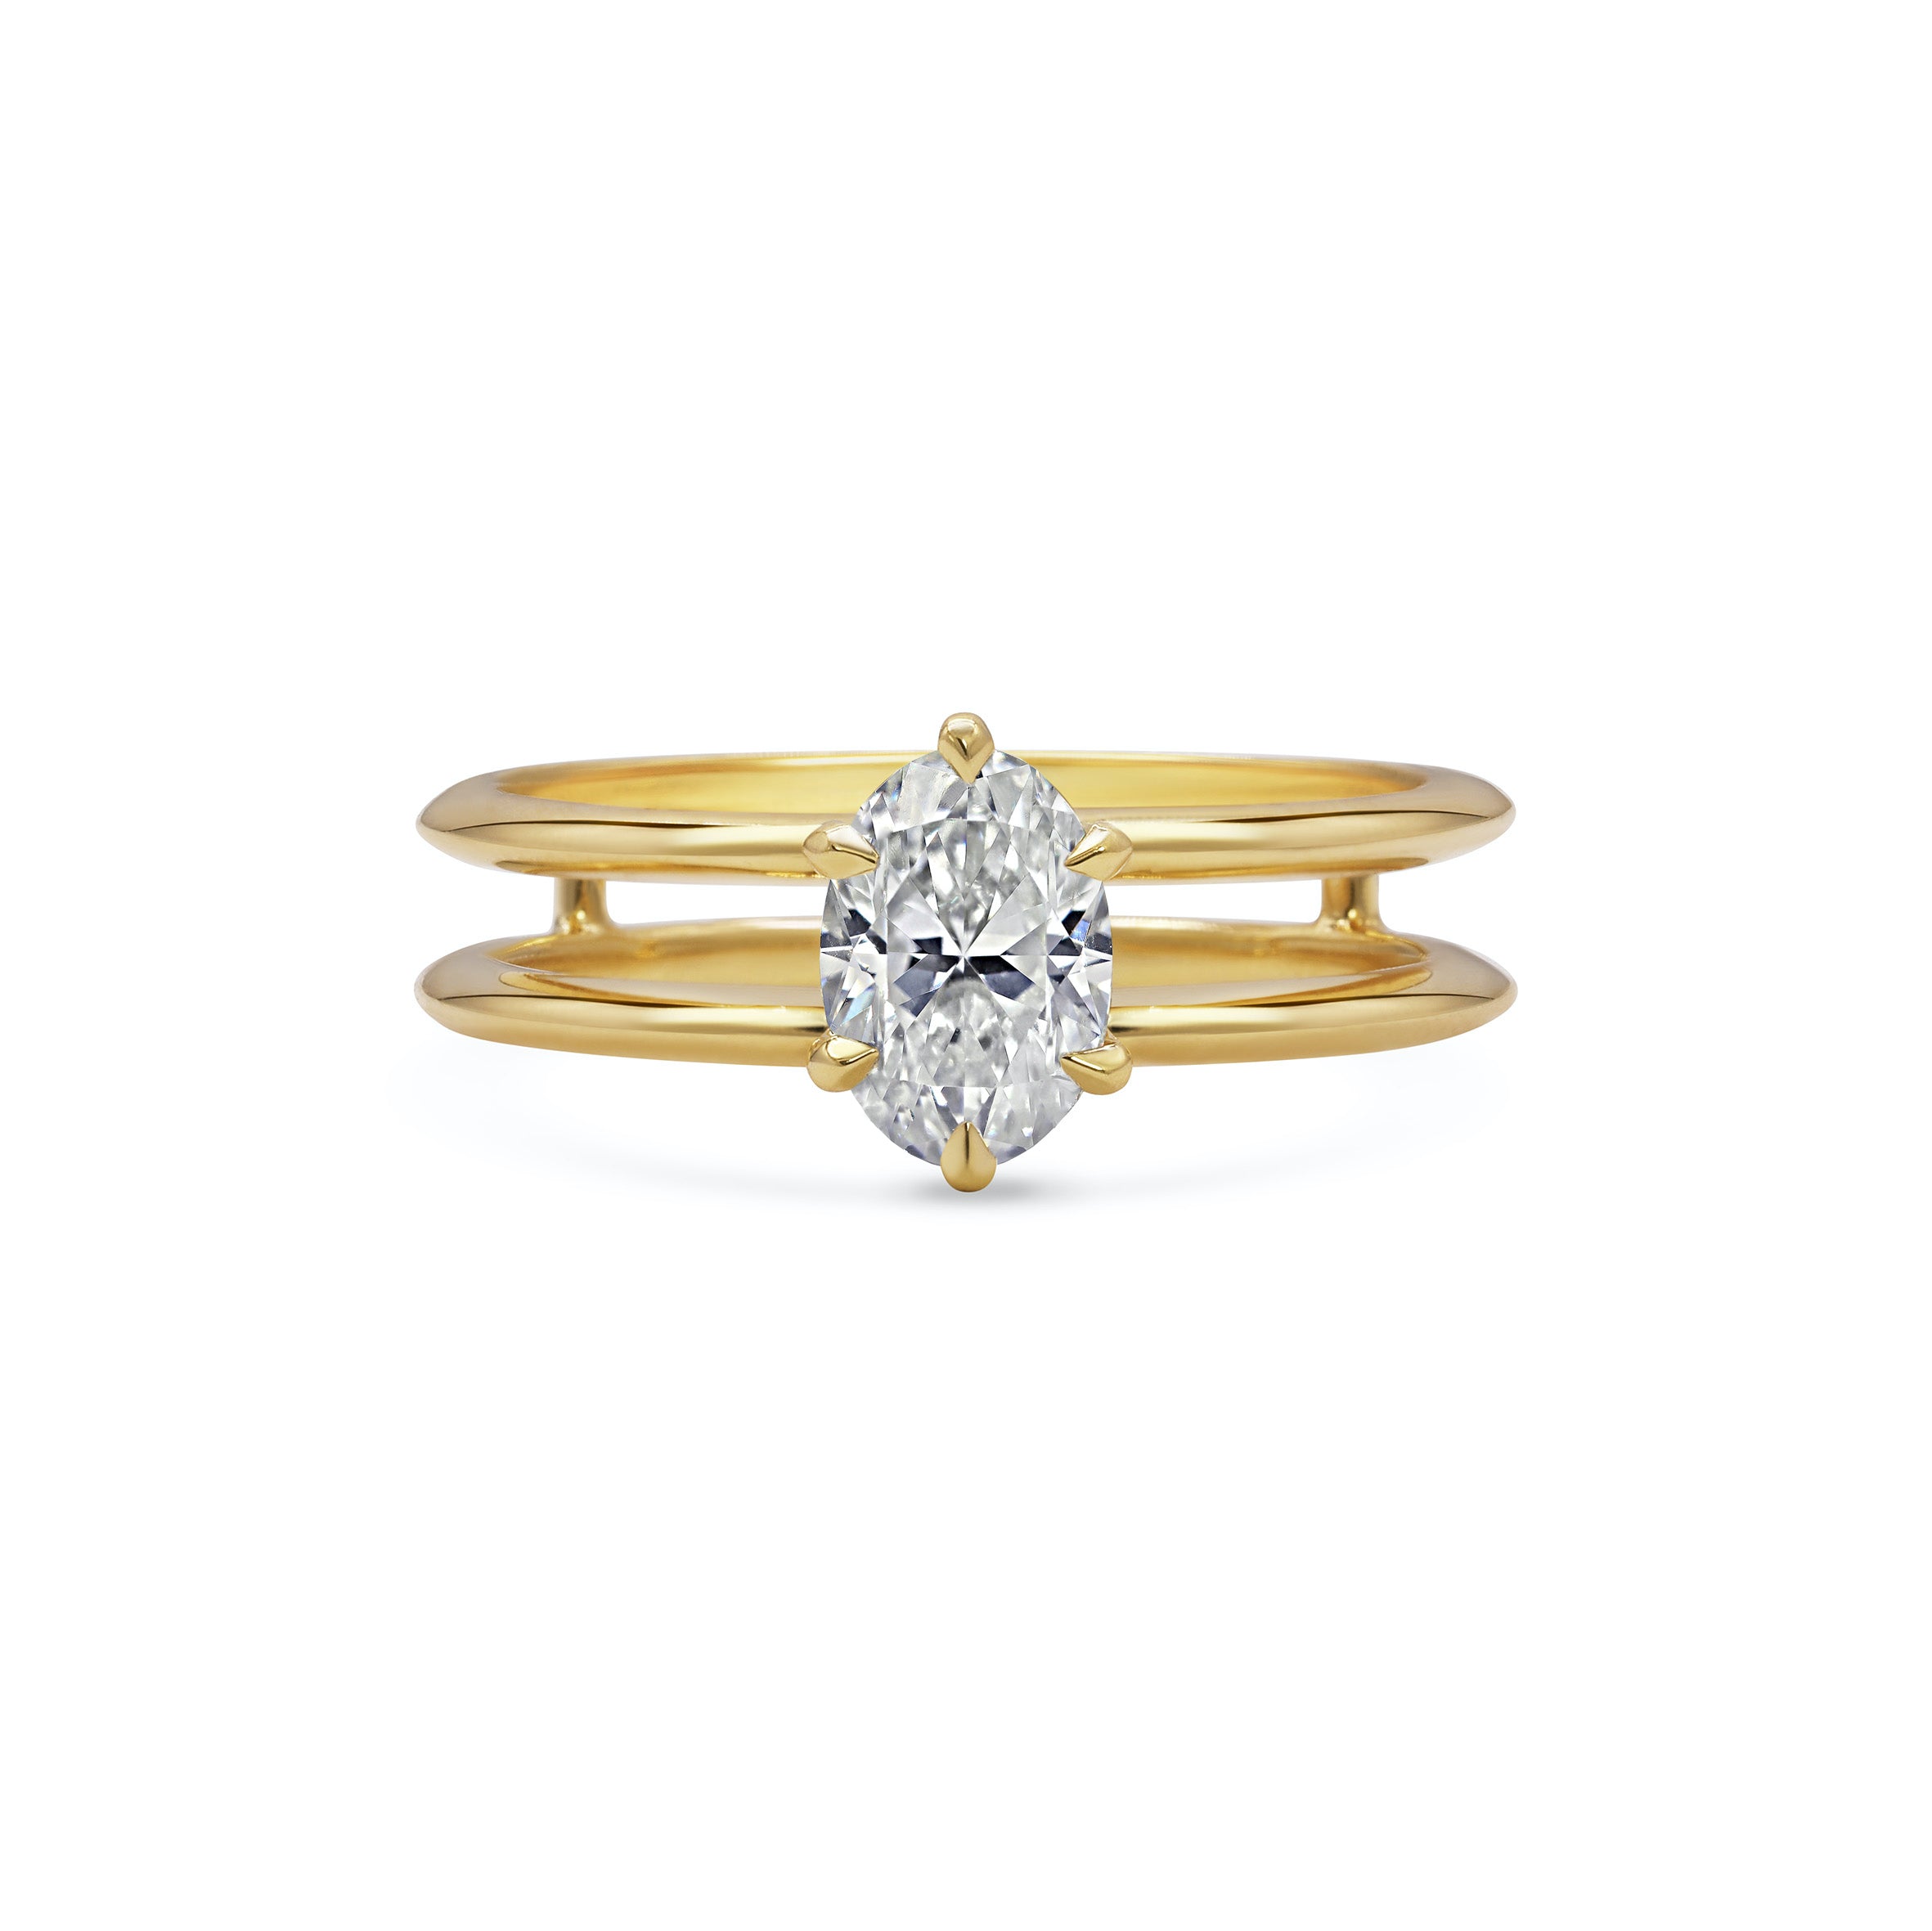 The Adelia Ring by East London jeweller Rachel Boston | Discover our collections of unique and timeless engagement rings, wedding rings, and modern fine jewellery.